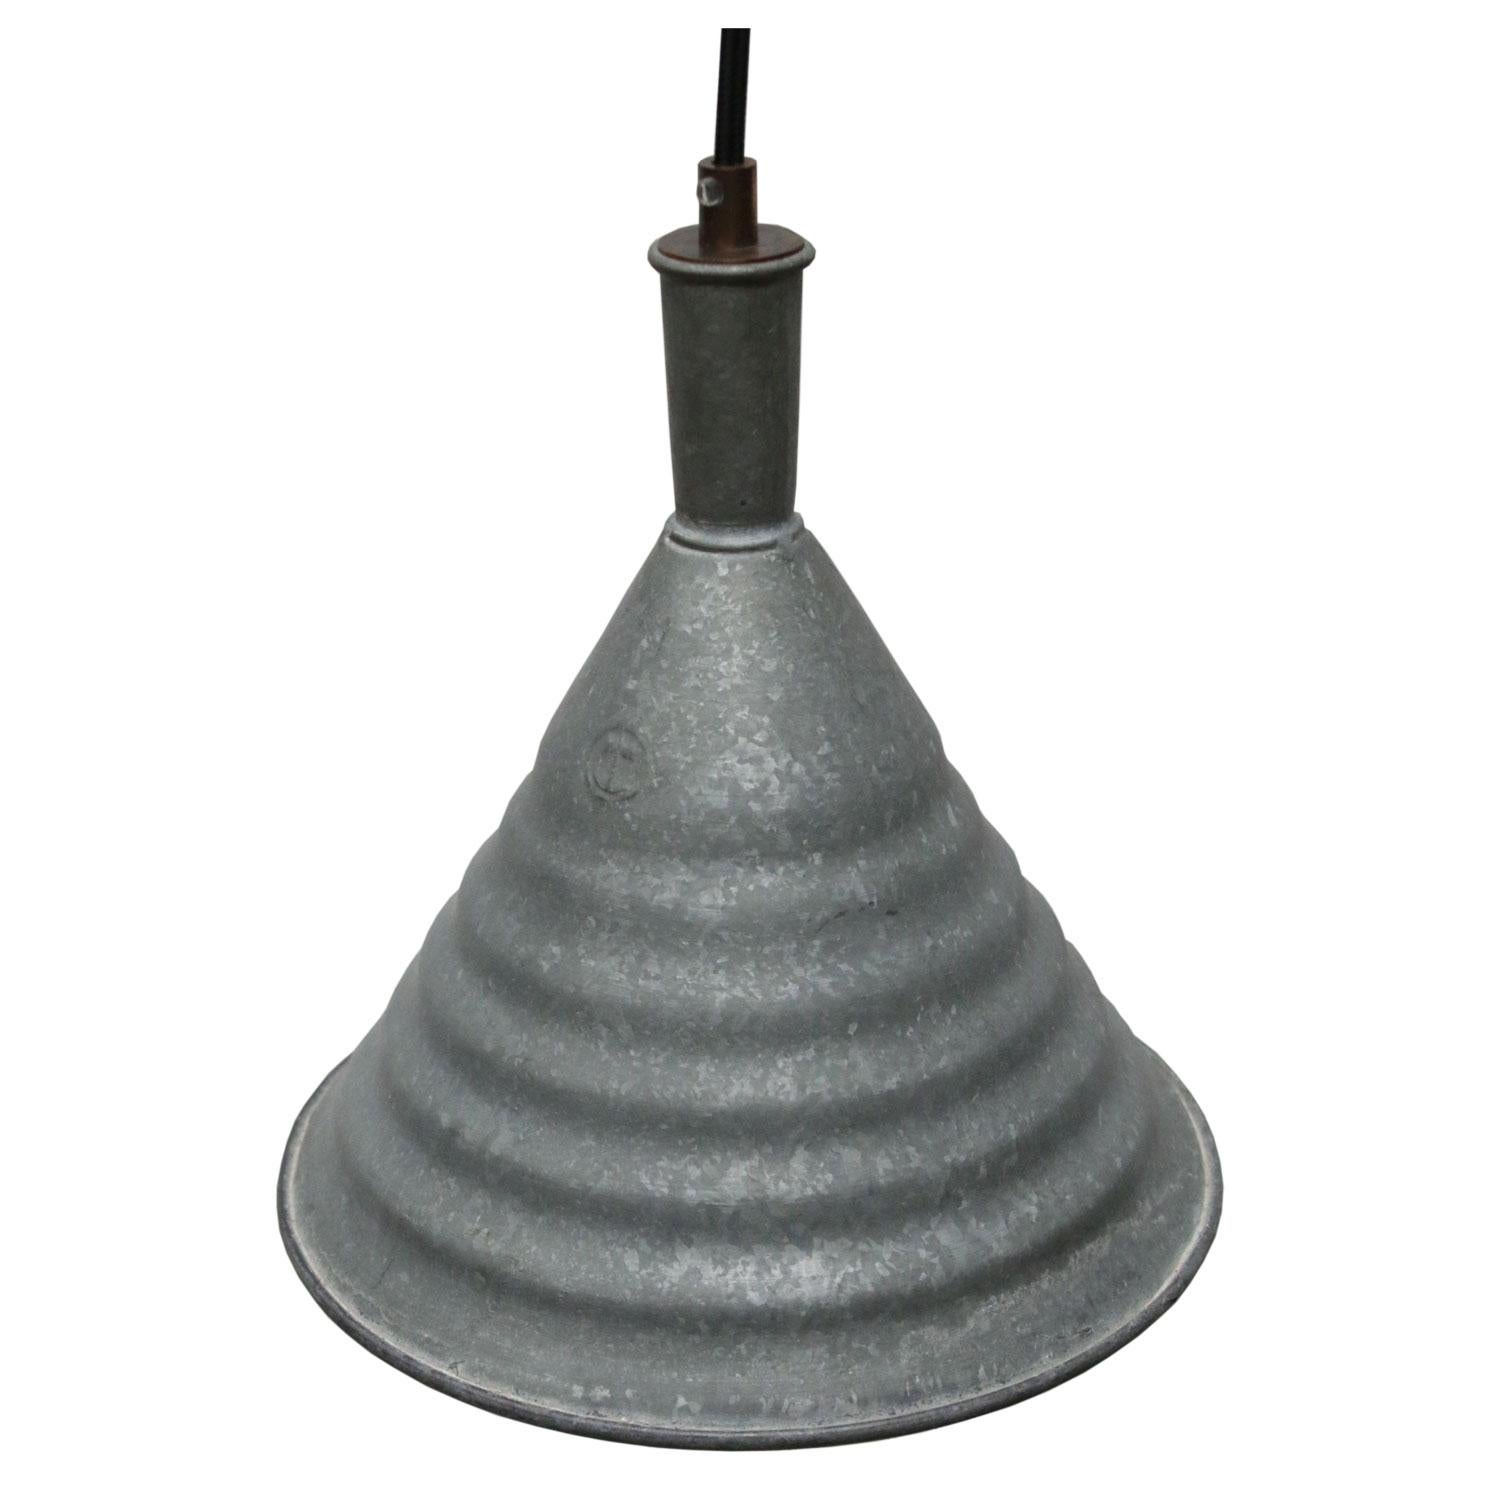 Vintage Industrial pendant. Metal farm lights.

Weight: 1.0 kg / 2.2 lb

Priced per individual item. All lamps have been made suitable by international standards for incandescent light bulbs, energy-efficient and LED bulbs. E26/E27 bulb holders